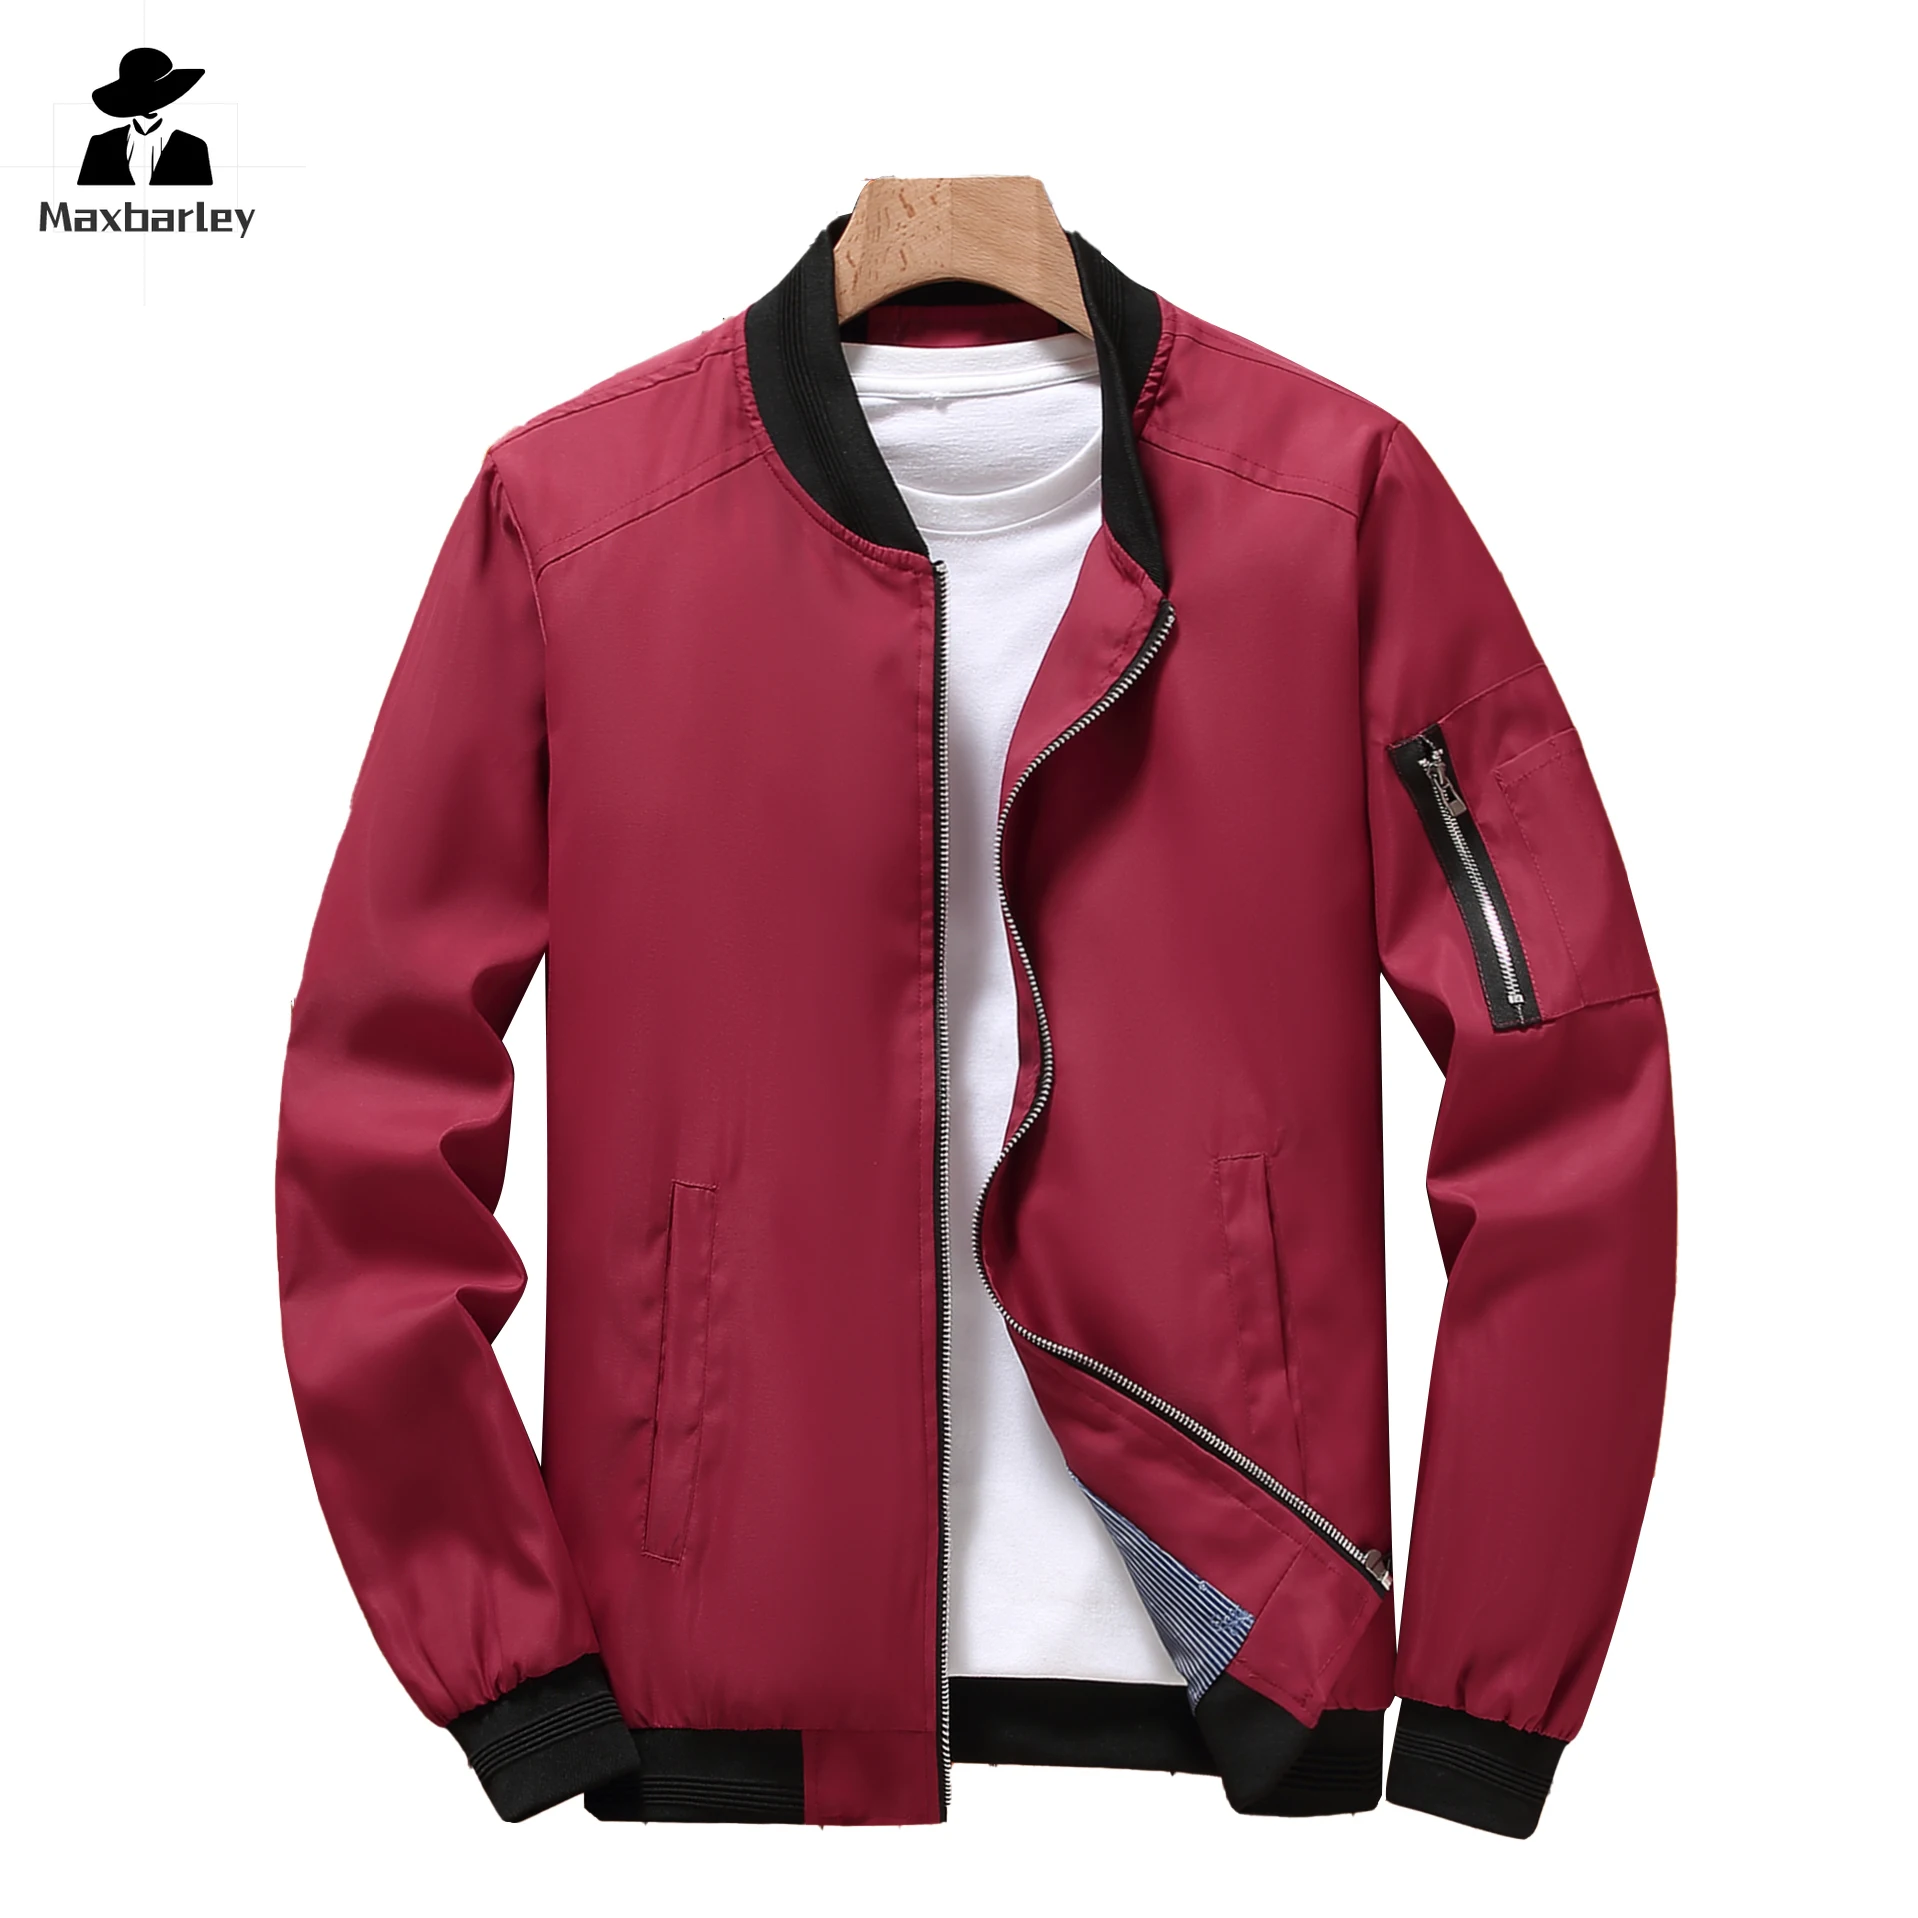 M-6XL Autumn Jacket Men's Thin Baseball Uniform Solid Color Windproof Cycling Coat plus size Loose MA-1 Bomber Jacket Men knitted woolen couple gloves winter solid color full finger mittens hand warmer men women gloves thicken cycling gloves